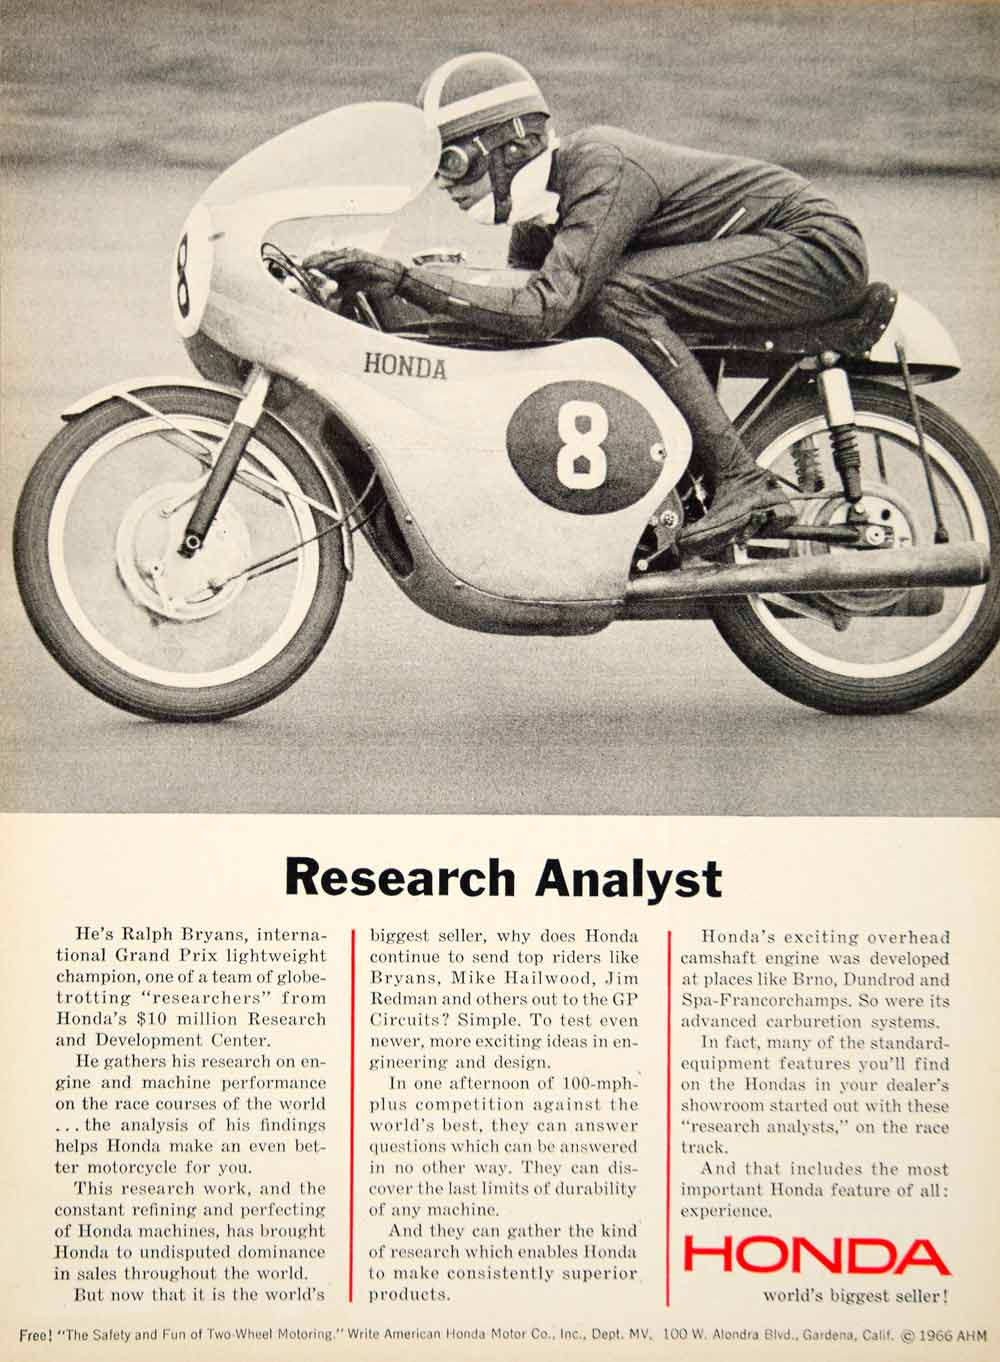 Honda motorcycle research analysis of the 1970s